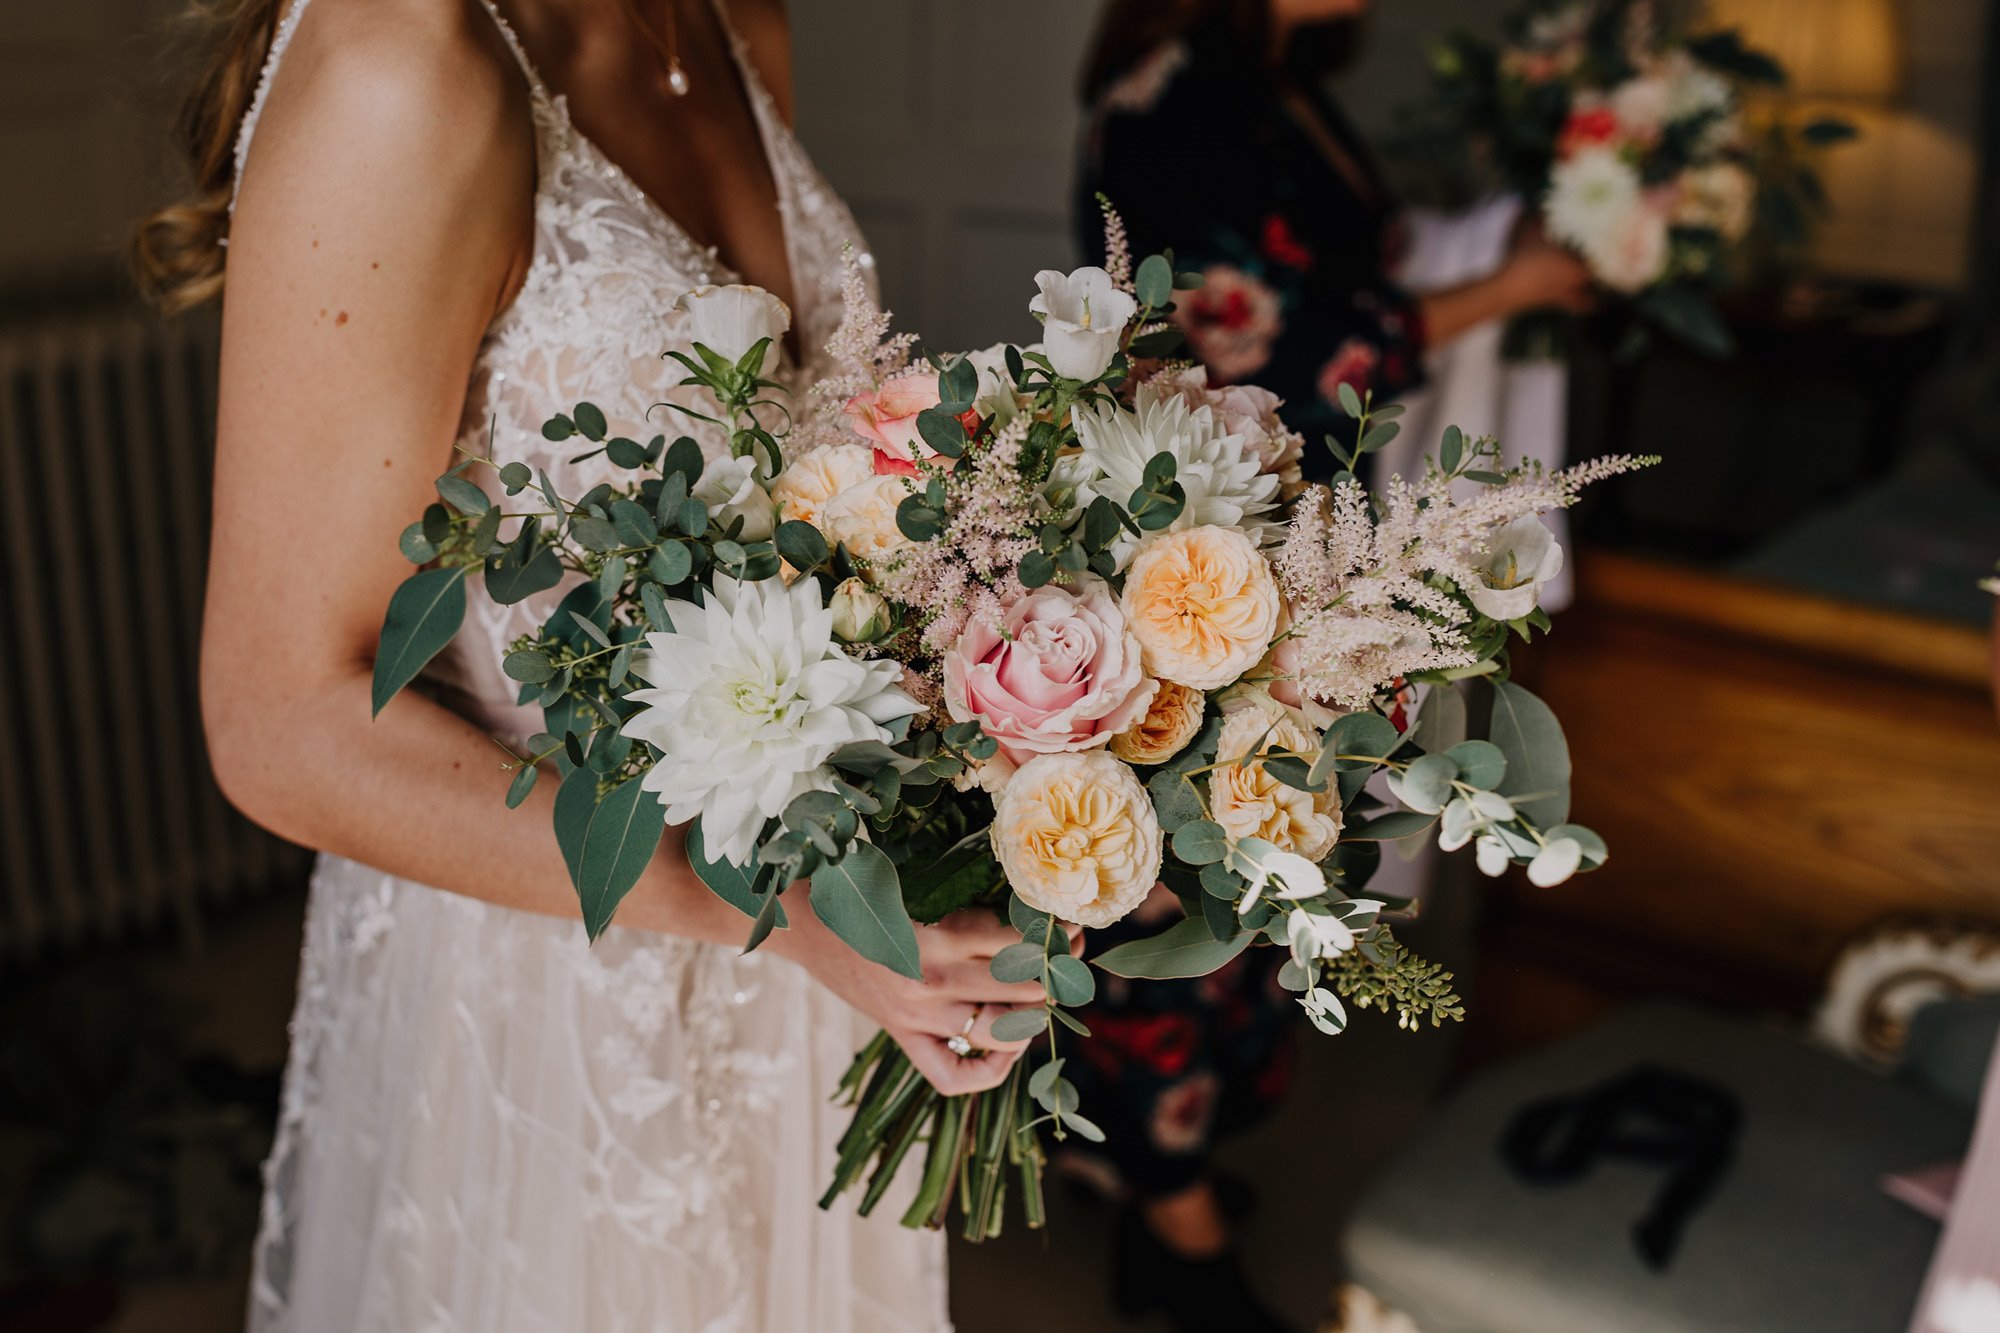 Bride in pearl necklace and pink lace wedding dress holding huge bouquet of pinks and greenery